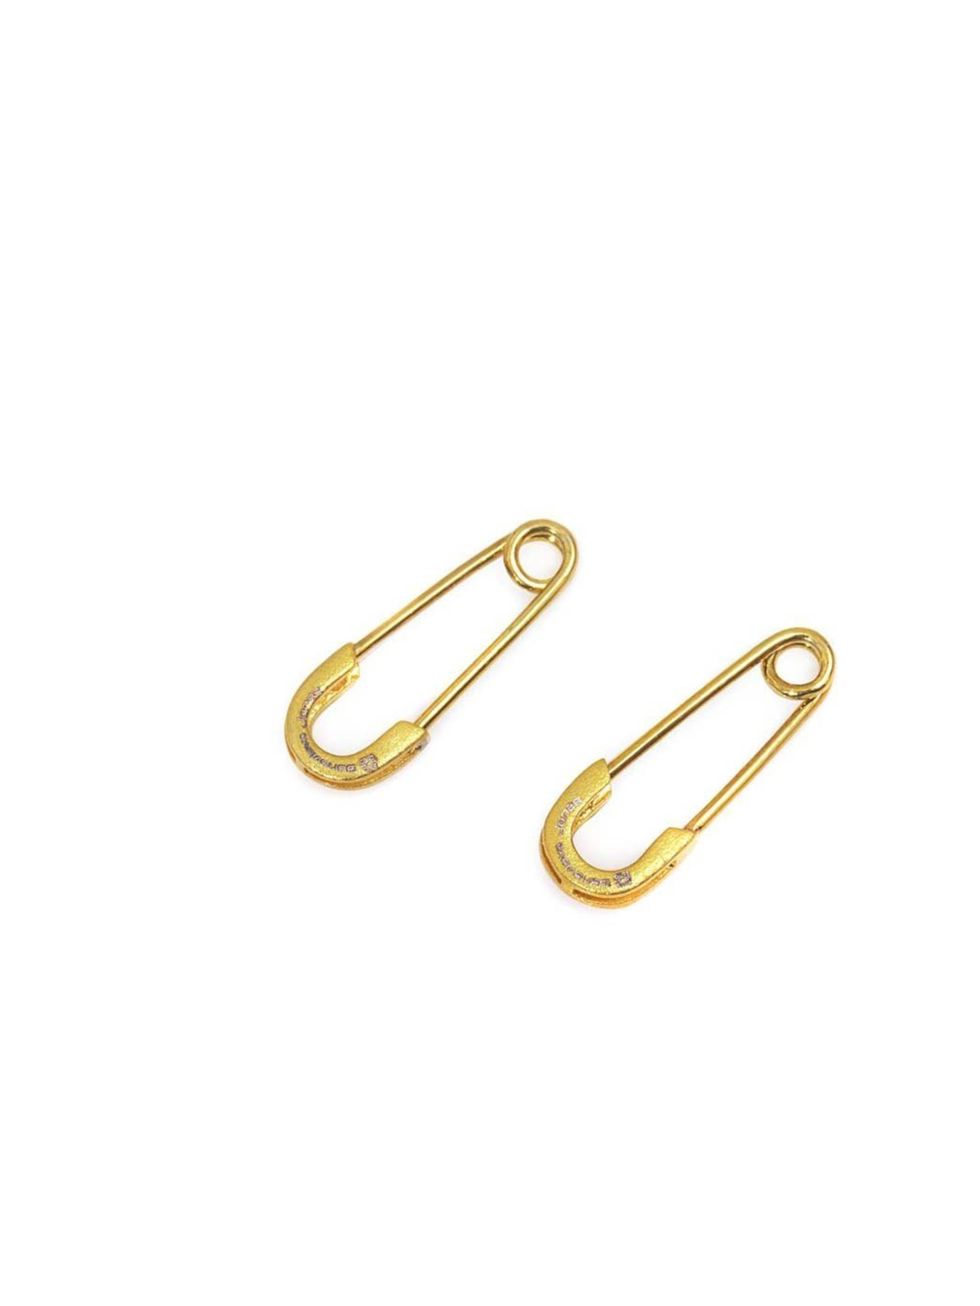 <p>An offbeat design in a classic gold finish, these safety pin earrings are punk grown-up.</p><p>Genevieve Jones earrings, £270 at <a href="http://www.matchesfashion.com/product/178094">MatchesFashion.com</a></p>